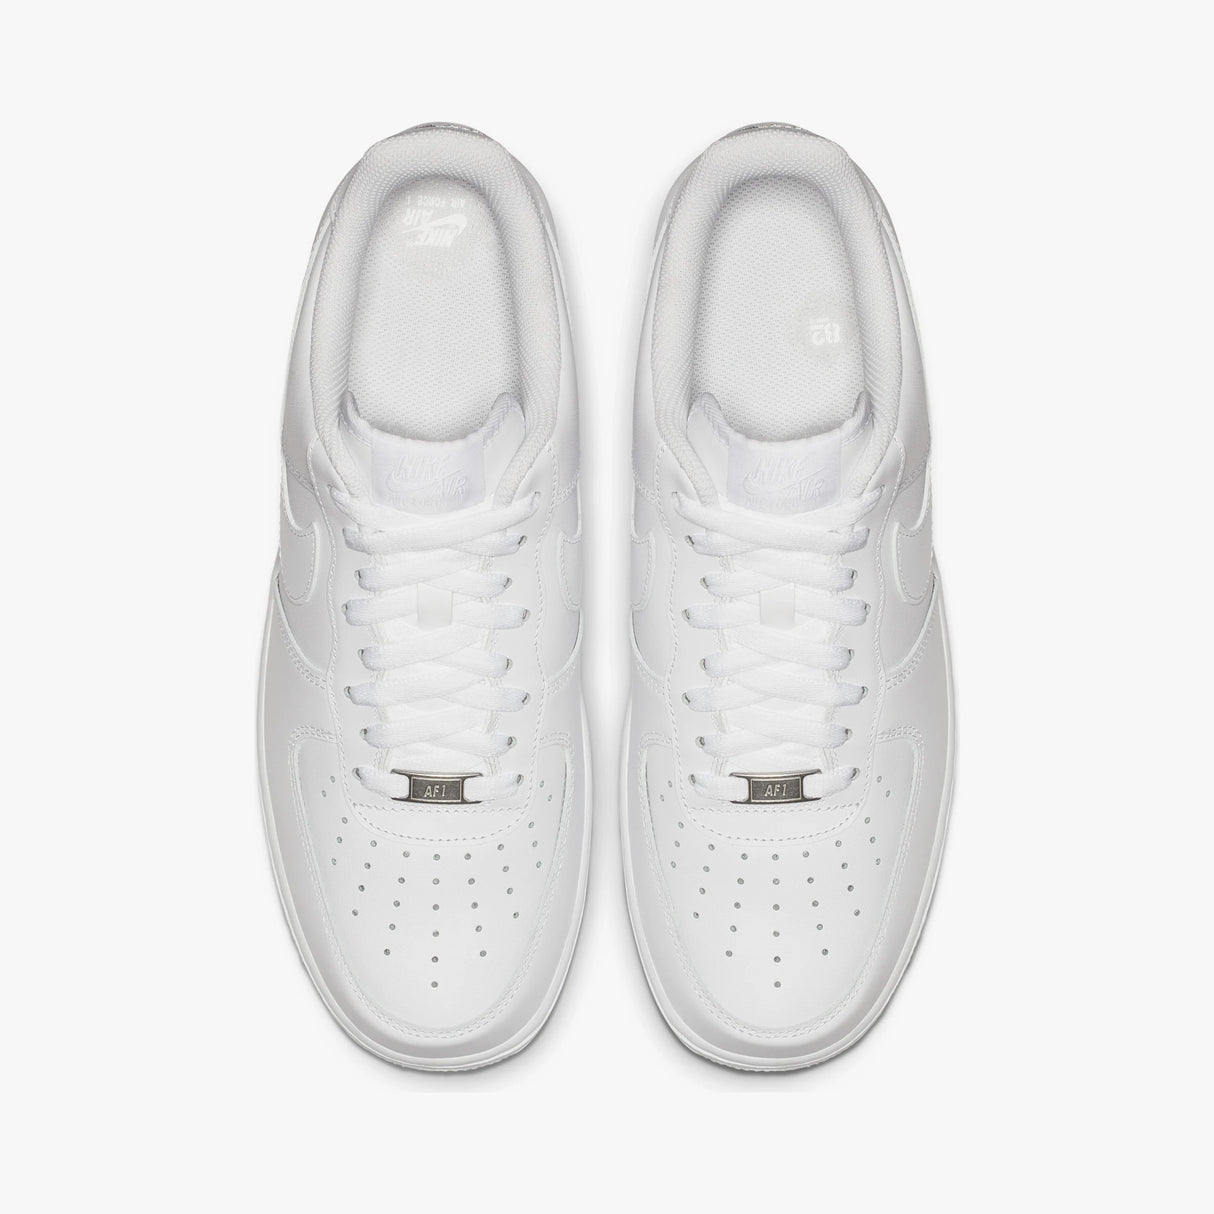 Nike Air Force 1 '07 Shoes in White [CW2288-111]